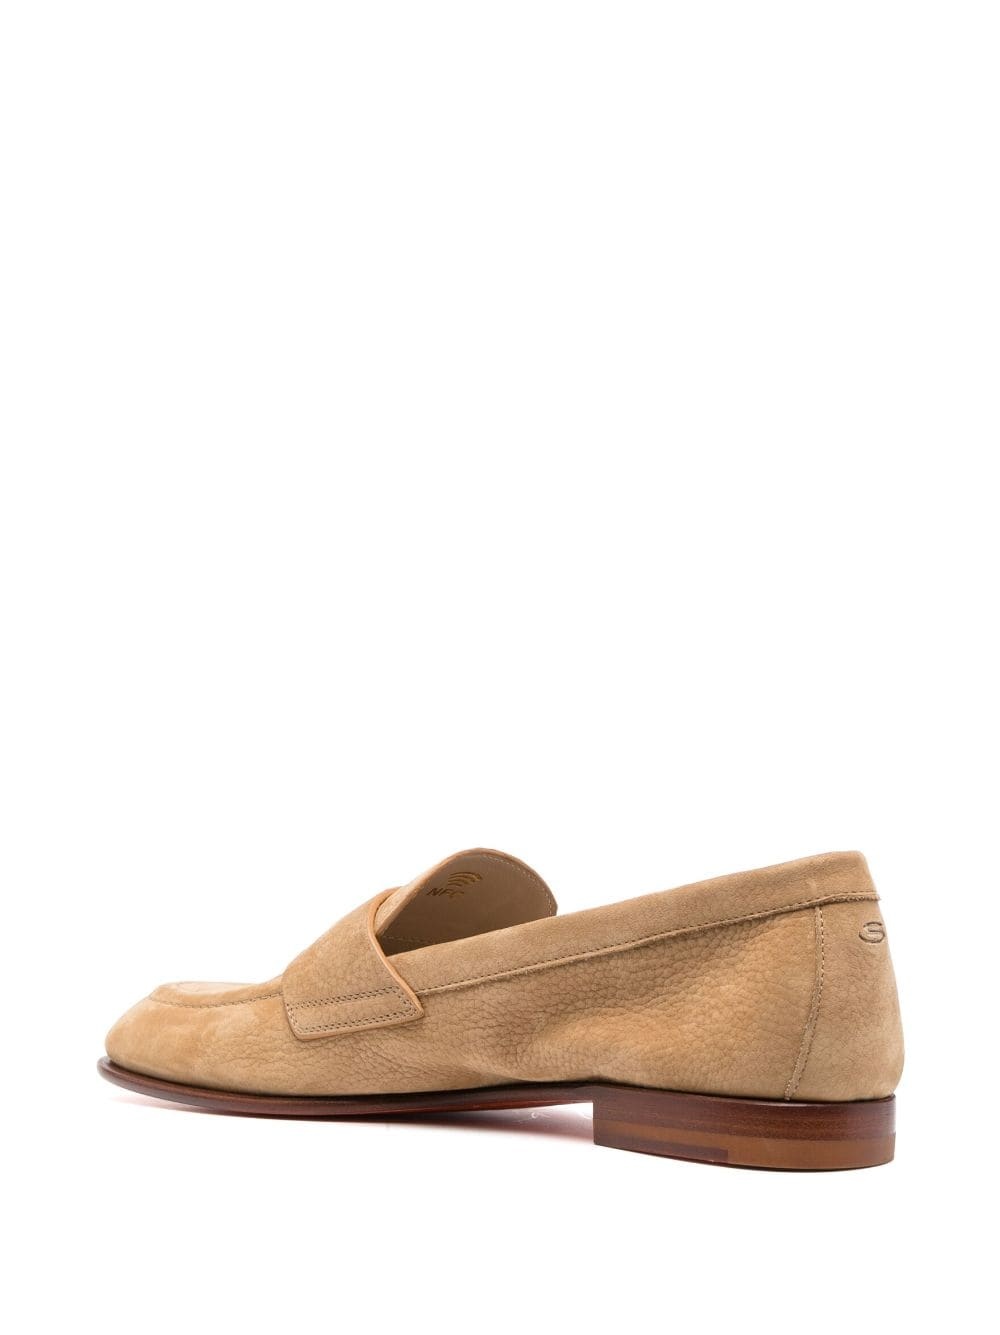 suede penny loafers - 3